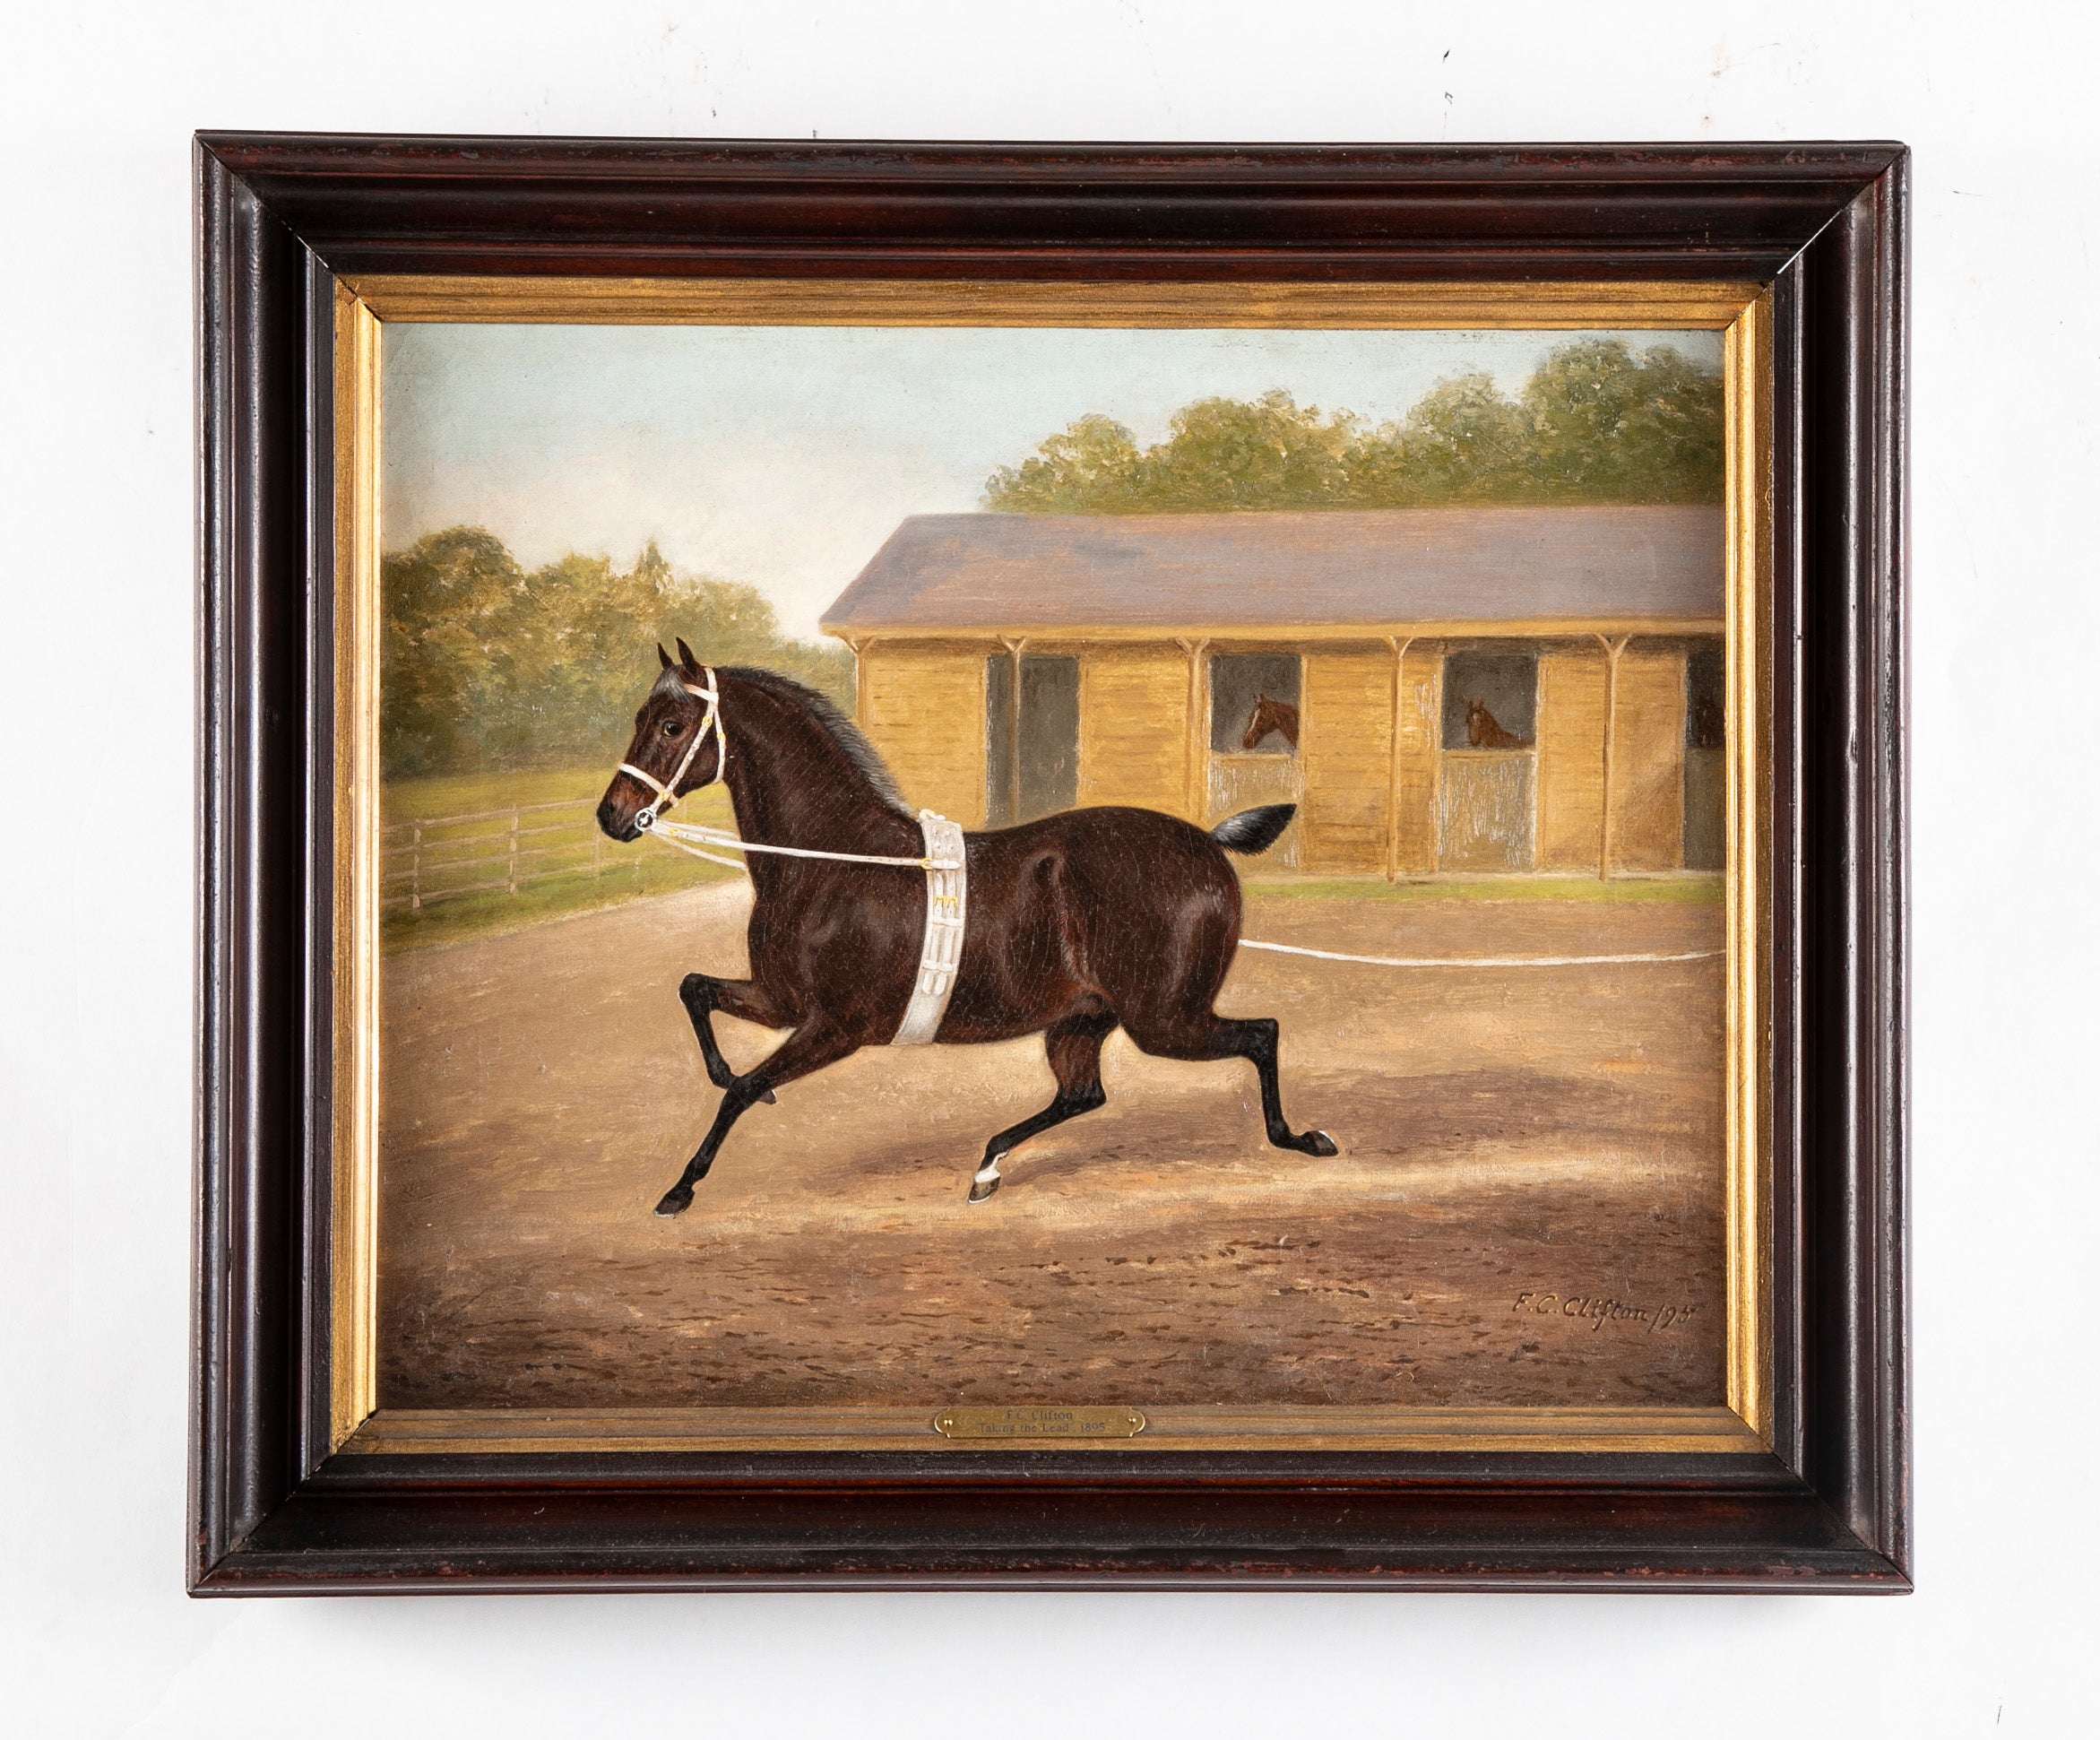 "Taking the Lead" Oil on Canvas by Equestrian Painter F. C. Clifton